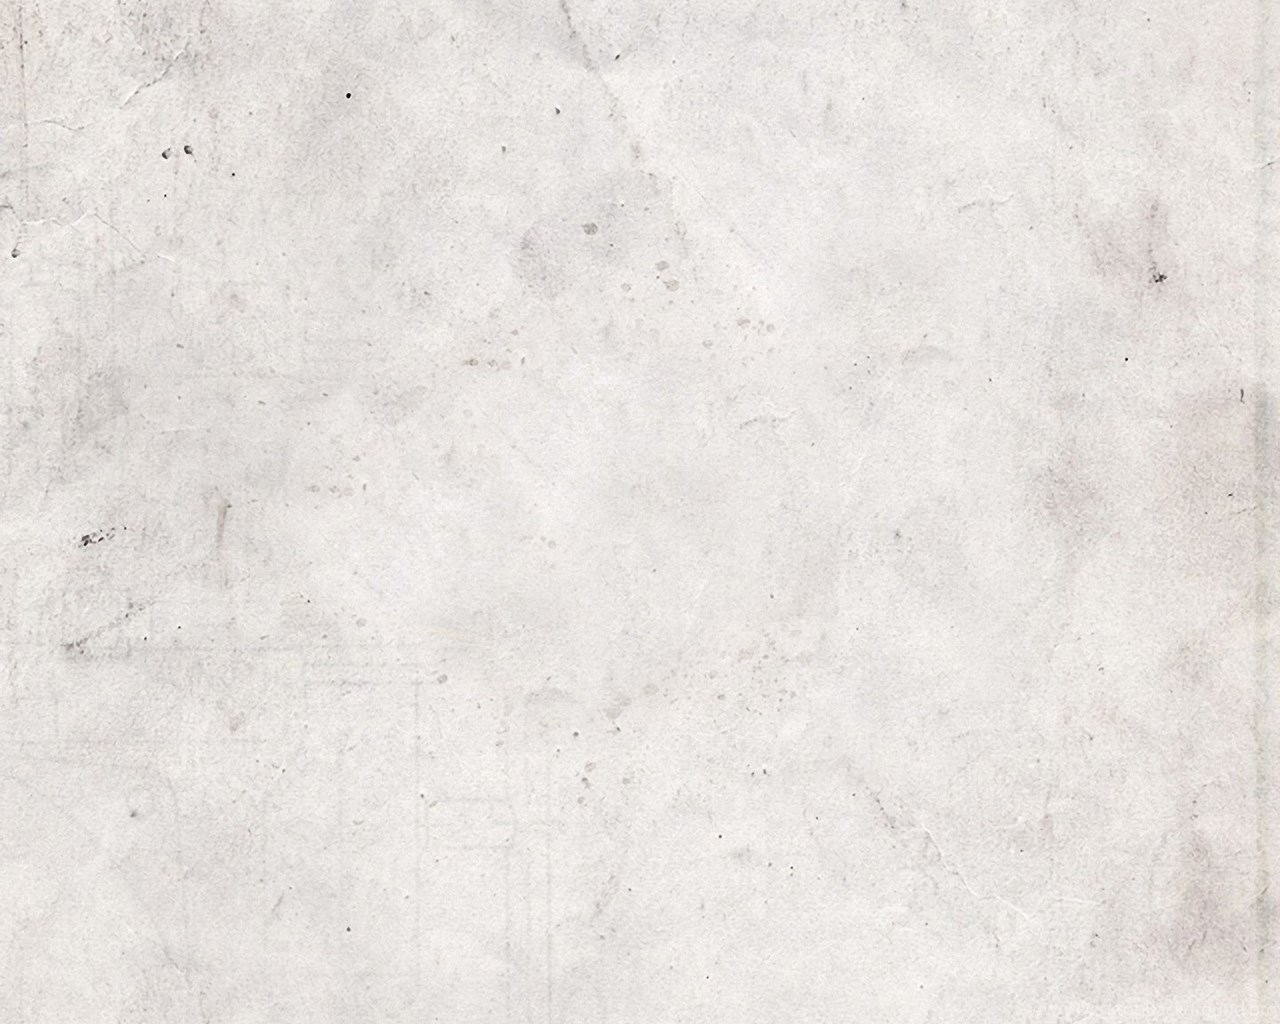 Yellowing Of The Old Paper Lg G3 Wallpapers Hd 1440x2560 Desktop Background